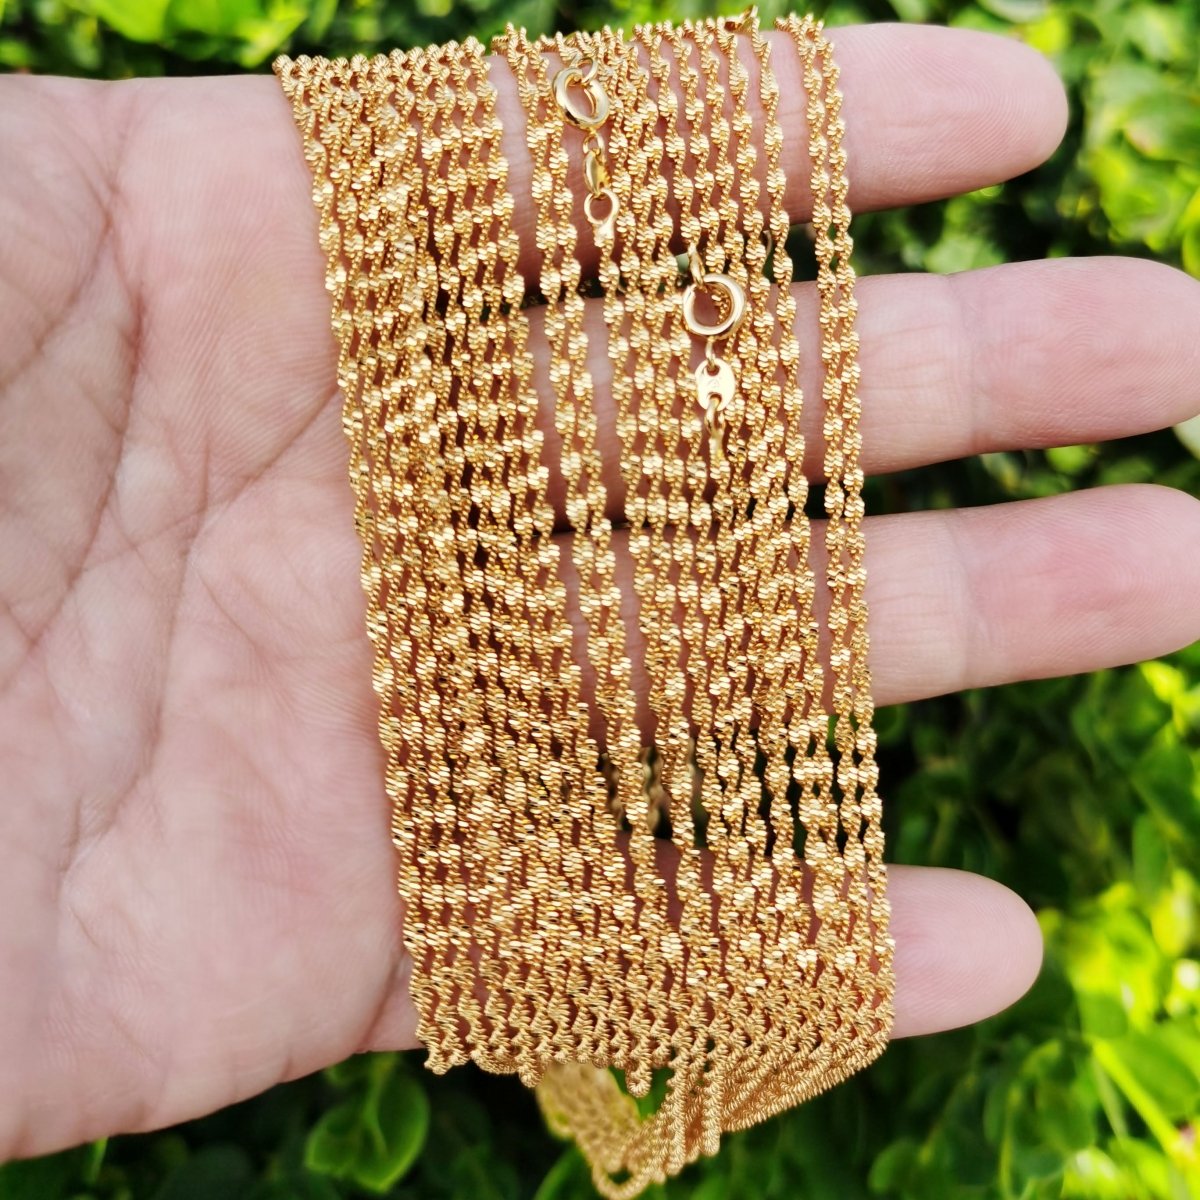 24K Gold Filled Criss Cross Singapore Chain Necklace, 23.6 Inch Criss Cross Finished Chain For Necklace Making, Dainty 1.9mm Criss Cross Necklace w/ Spring Ring | CN-888 Clearance Pricing - DLUXCA